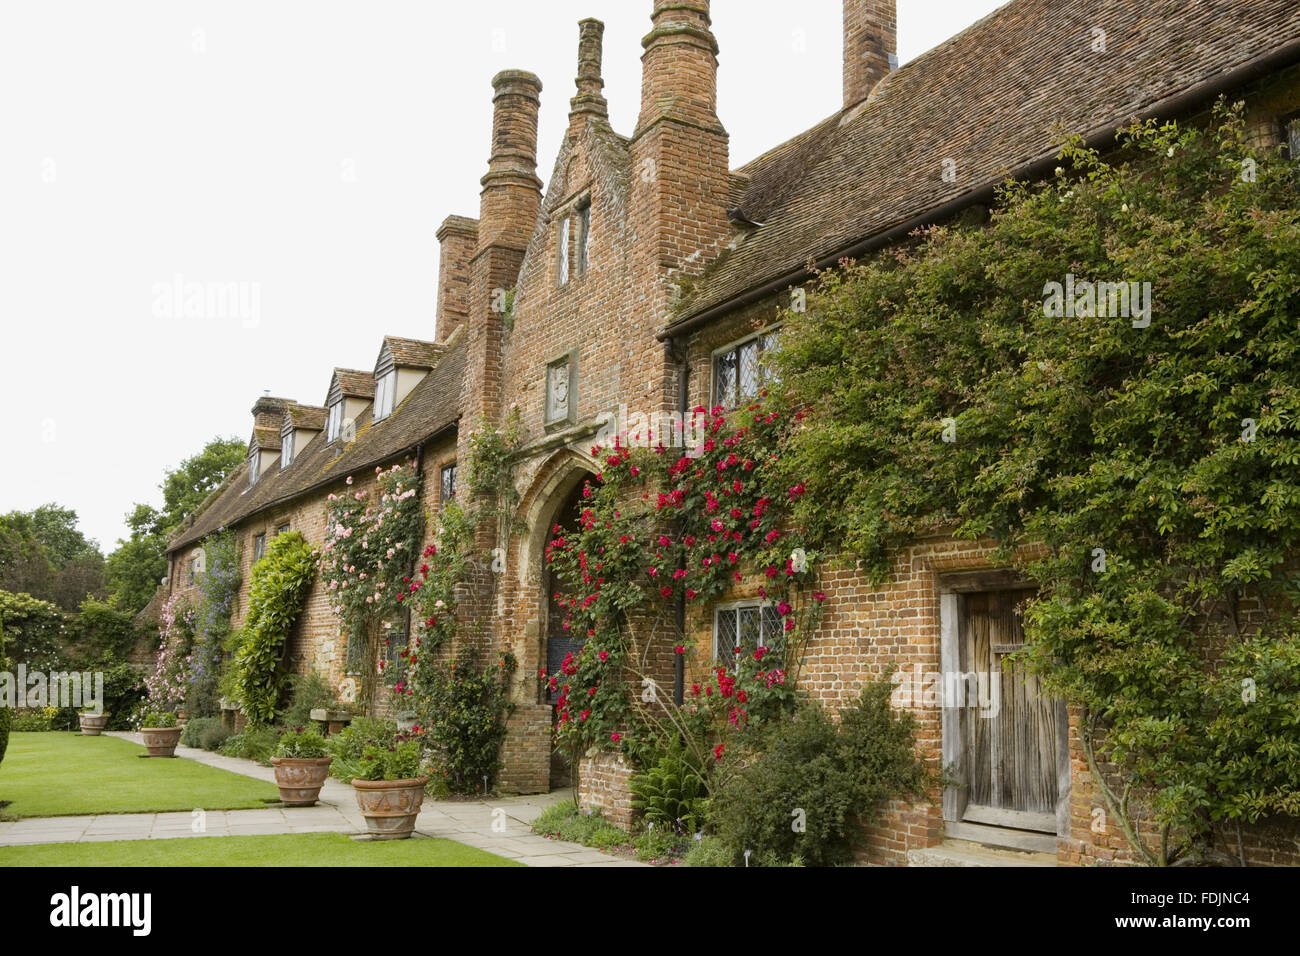 The front range and oldest part of the building, c.1490, seen here on the inner side of the Front Courtyard at Sissinghurst Castle Garden, near Cranbrook, Kent. The red rose 'Allen Chandler' climbs around the archway. Stock Photo